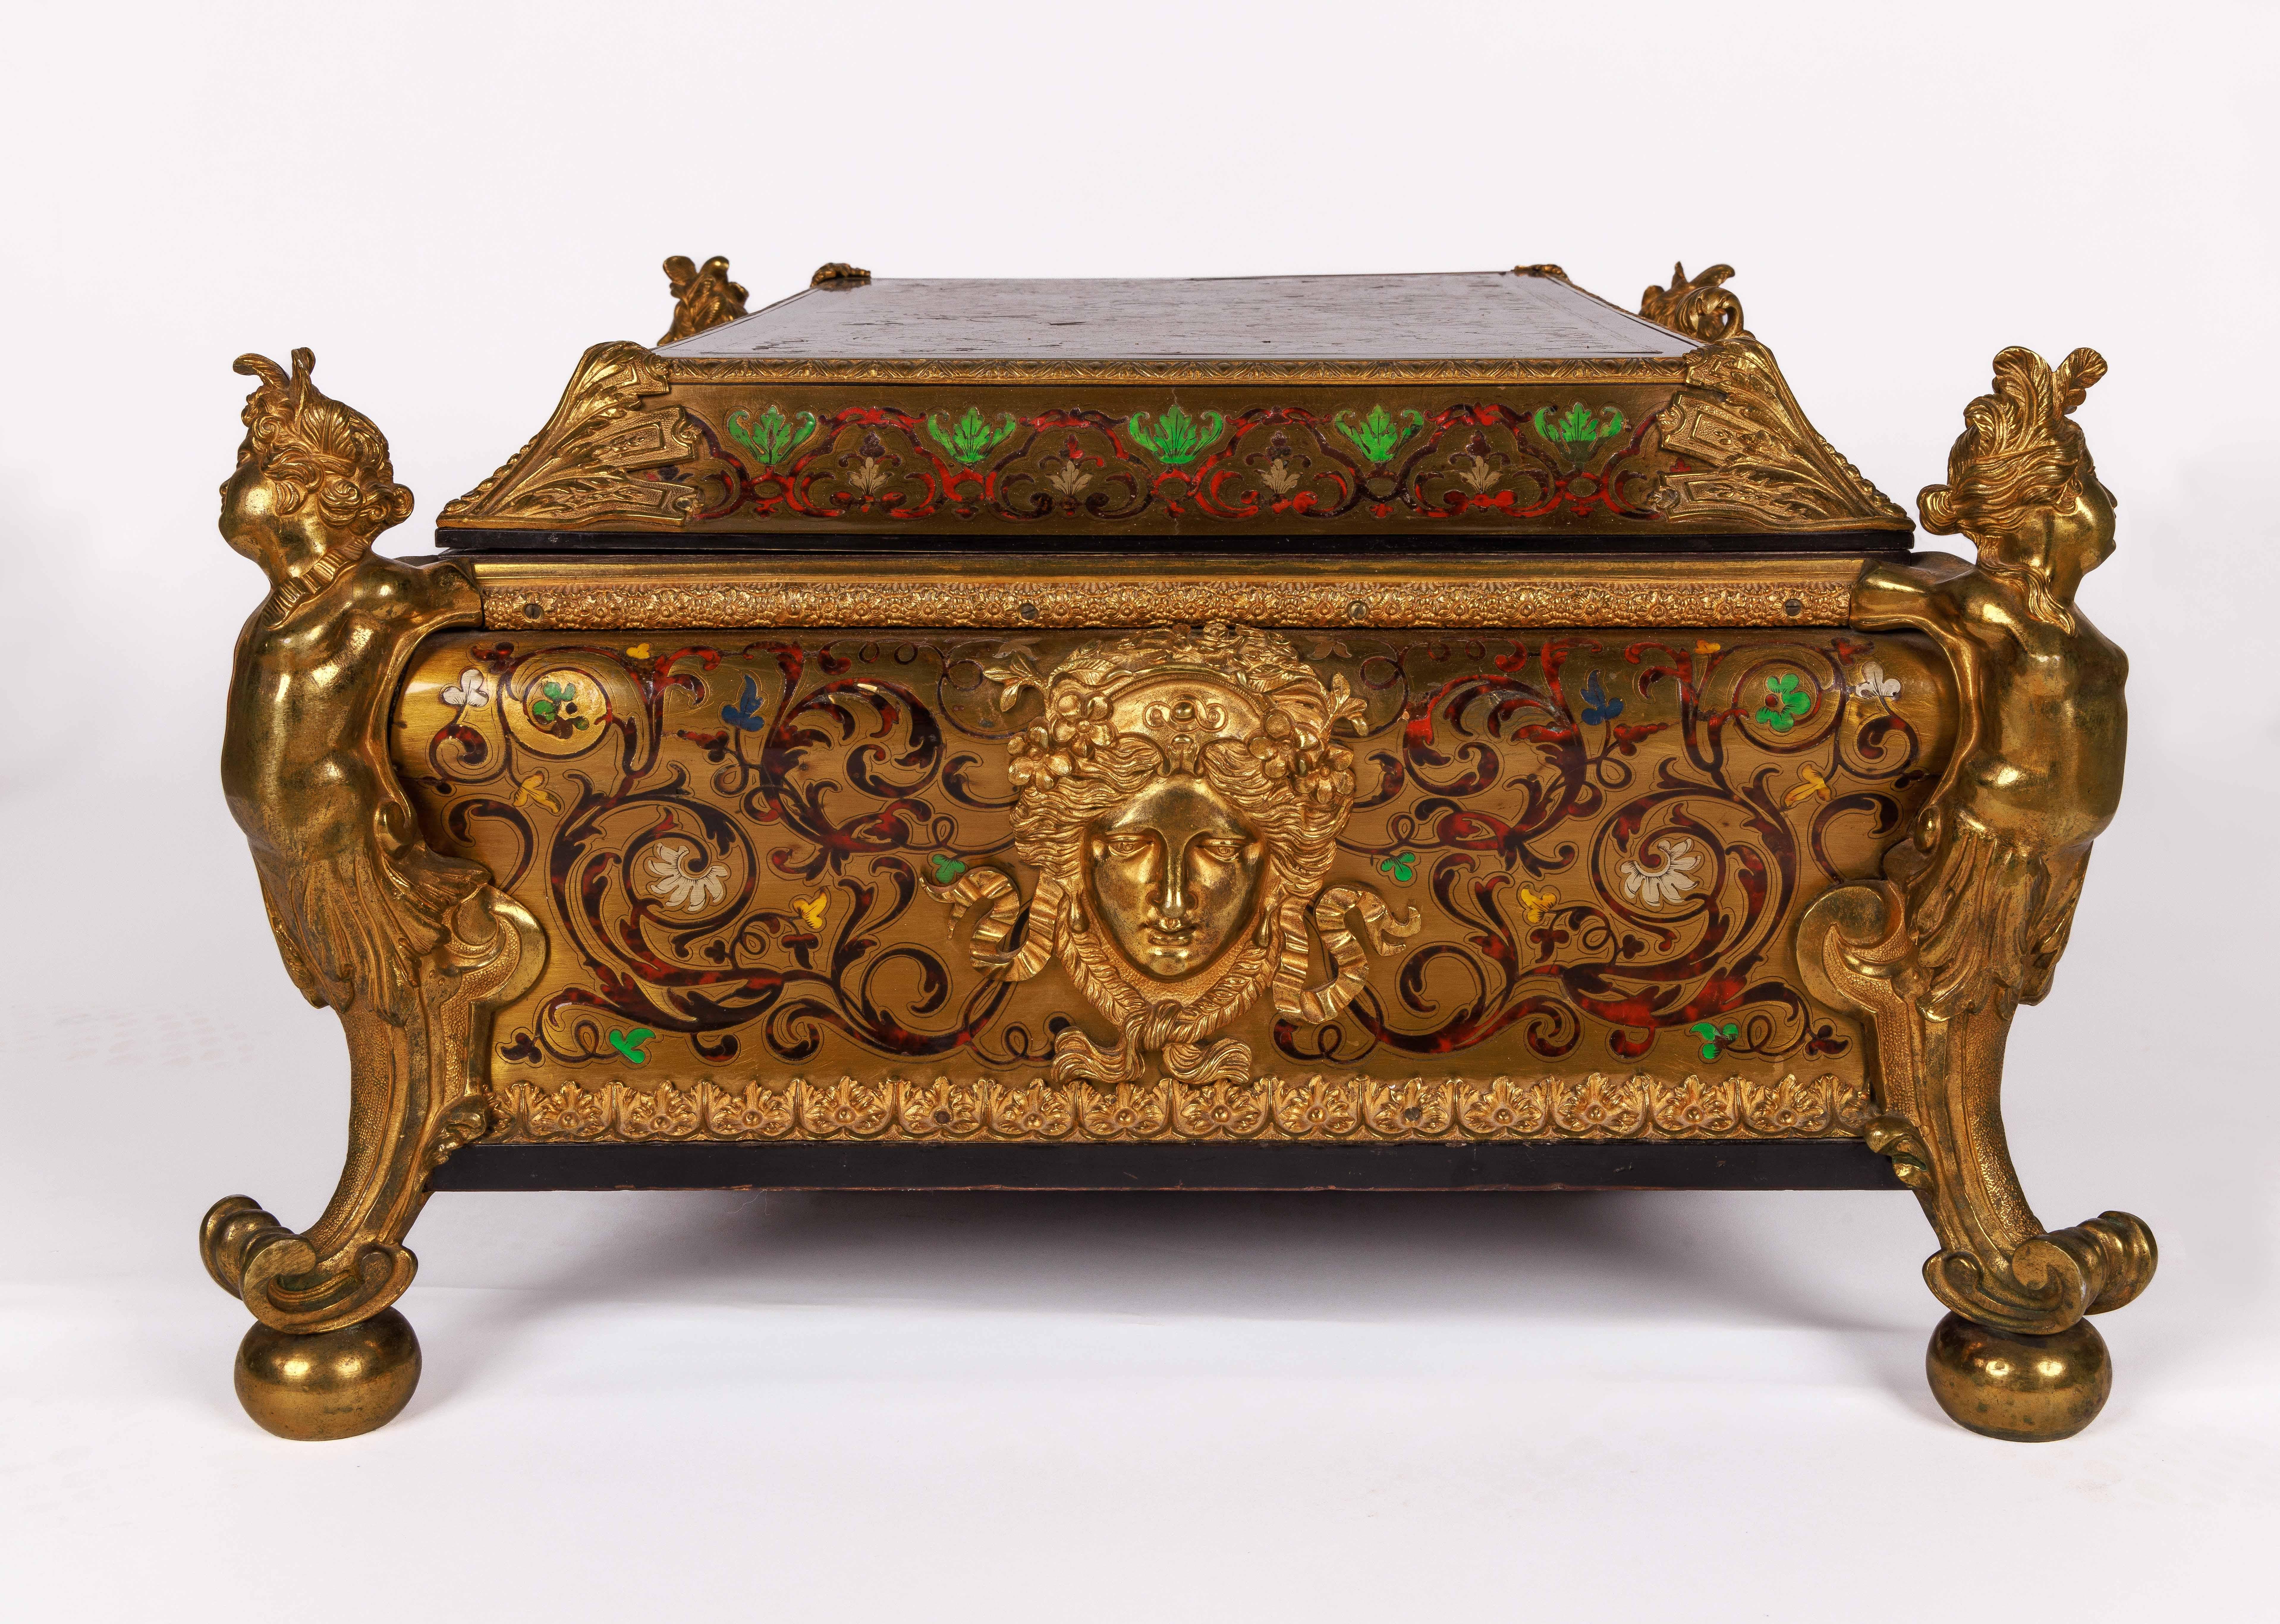 Monumental Louis XIV Style Gilt-Bronze Mounted Boulle Marquetry Casket Box For Sale 2